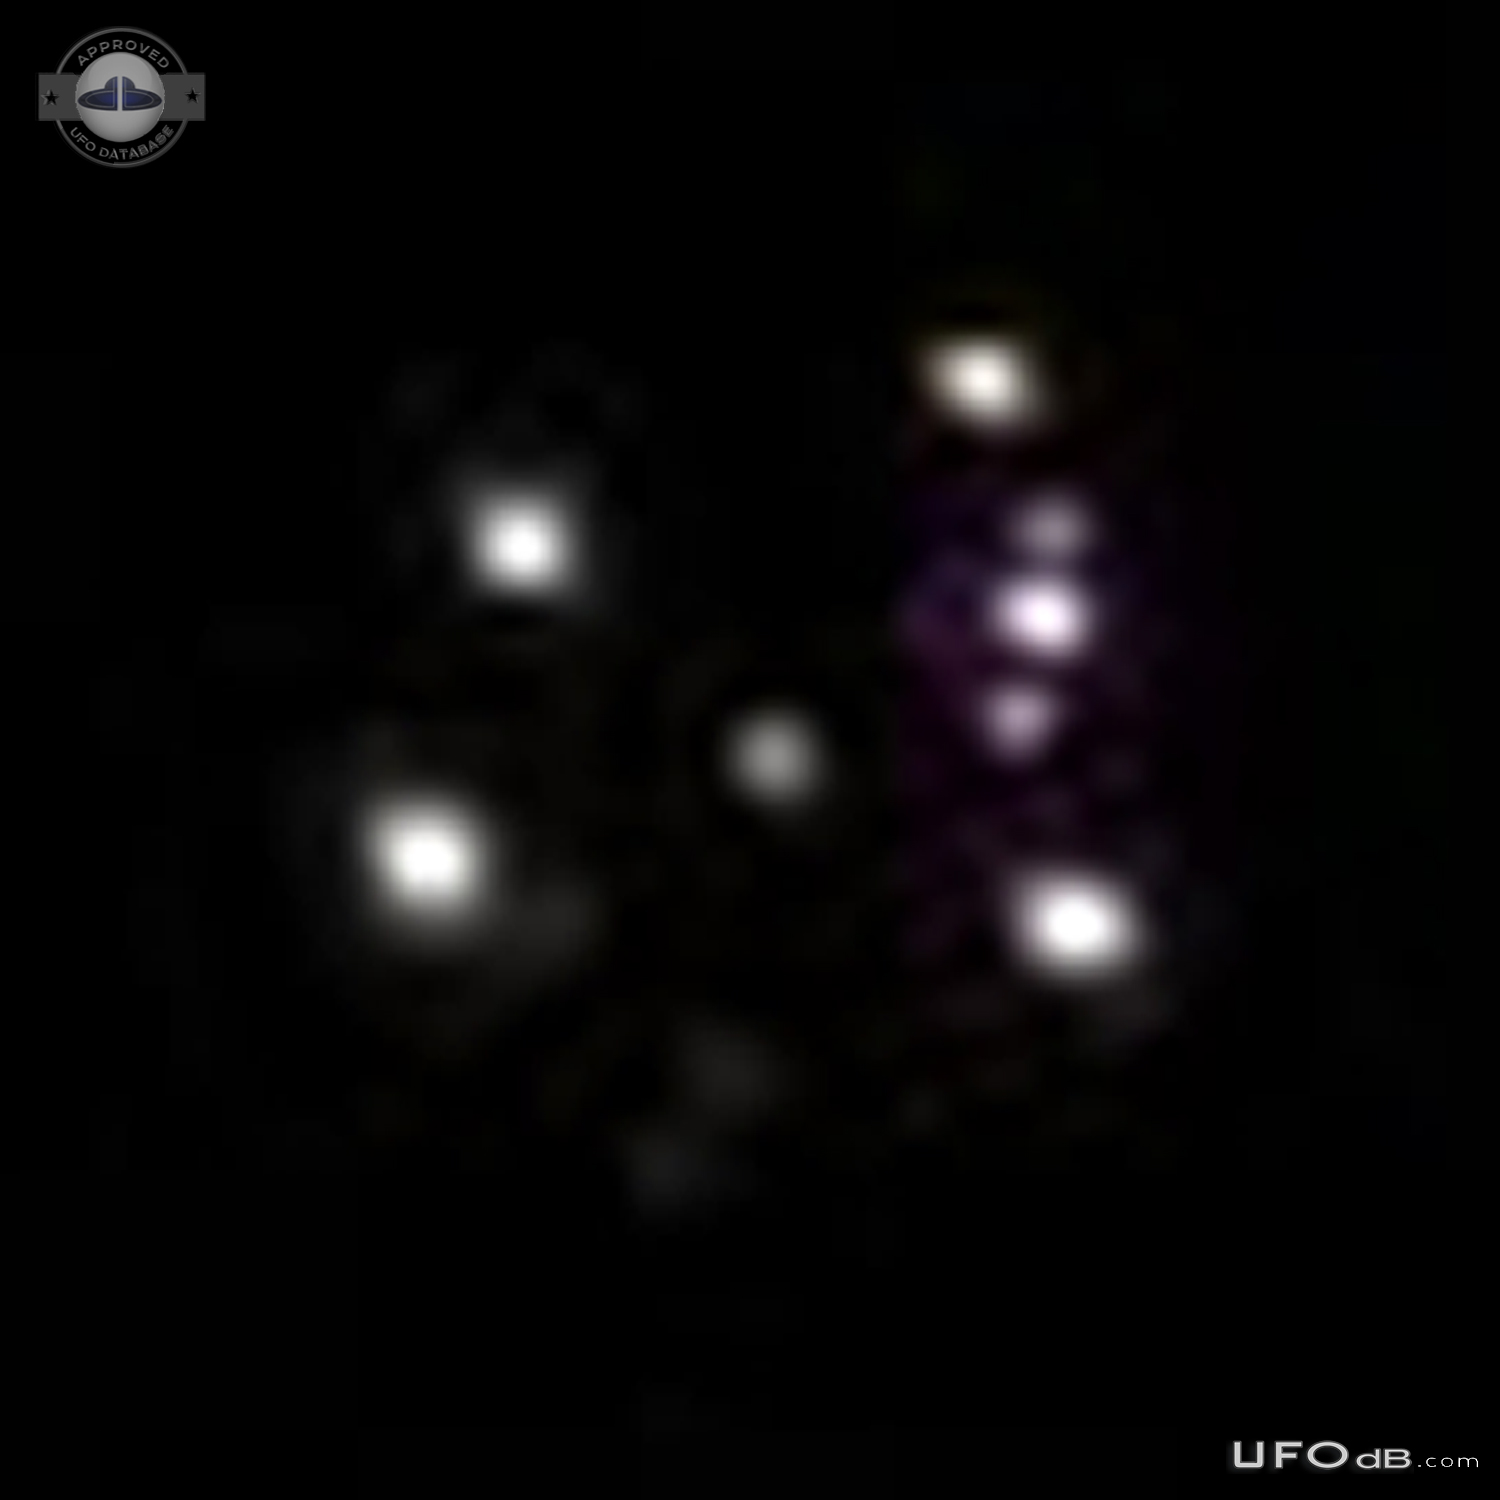 Cluster of lights UFOS seemed to form a triangular shape Colorado 2013 UFO Picture #695-5